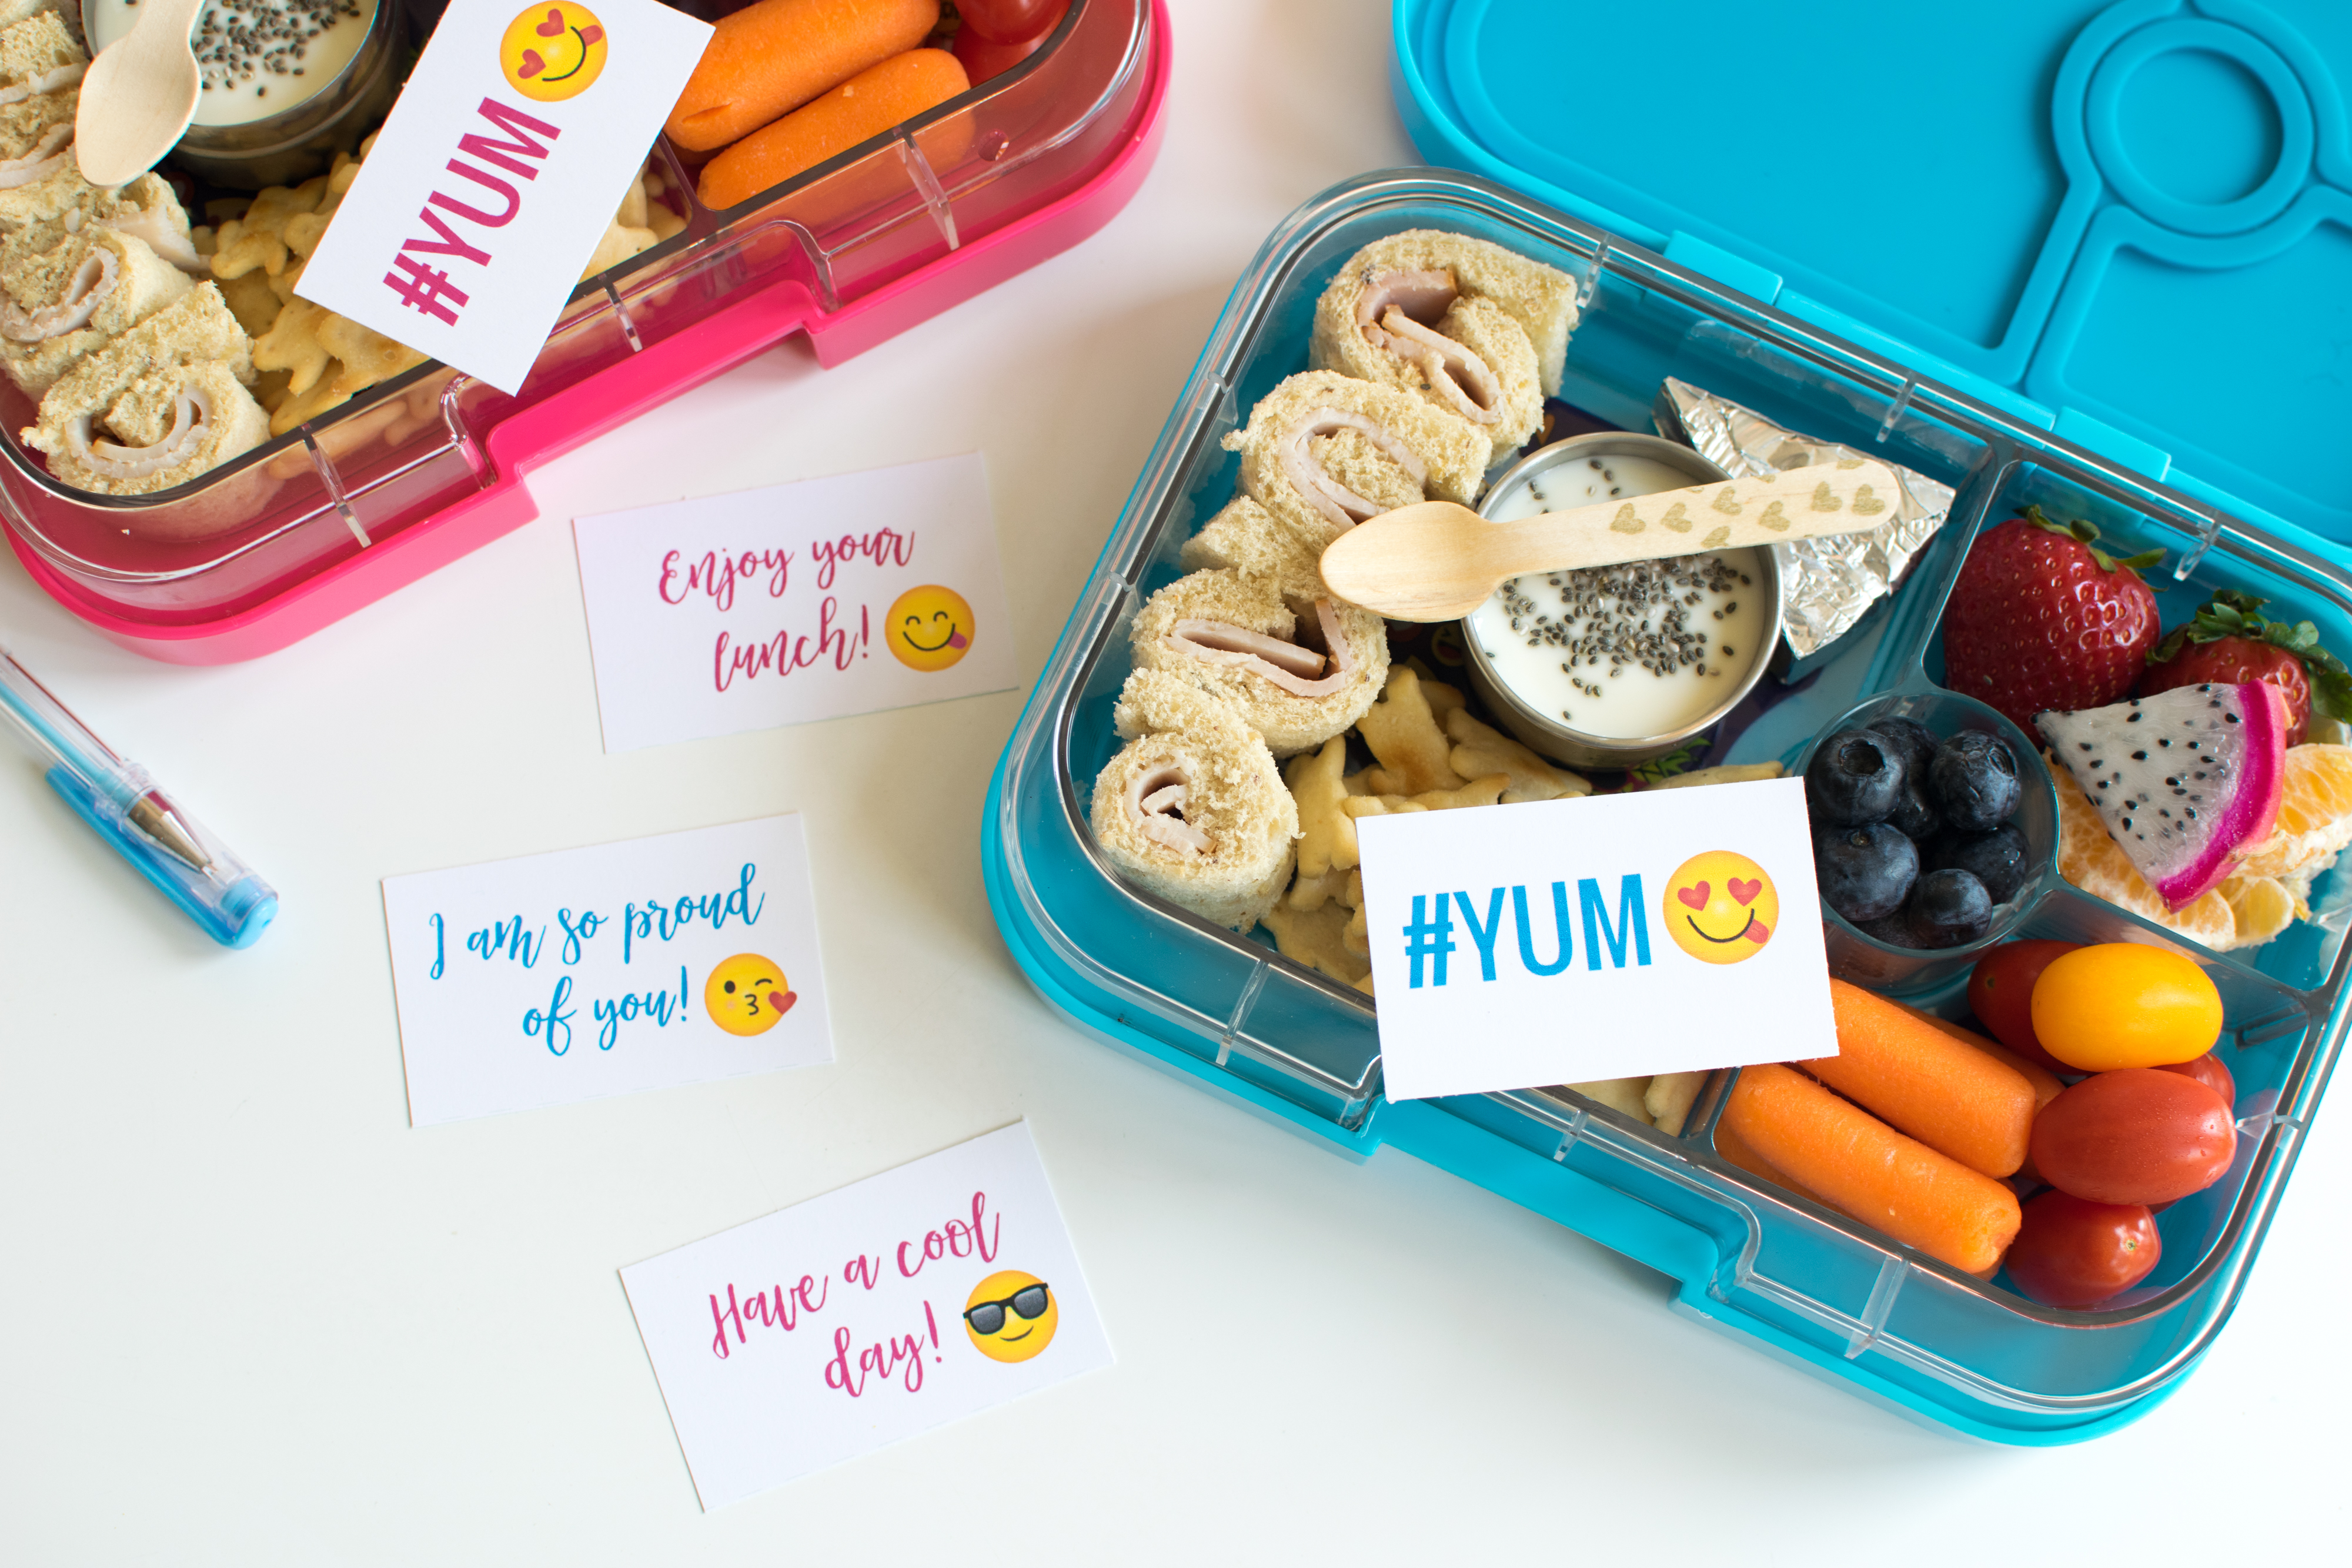 Free Emoji School Lunch Notes for your Yumbox